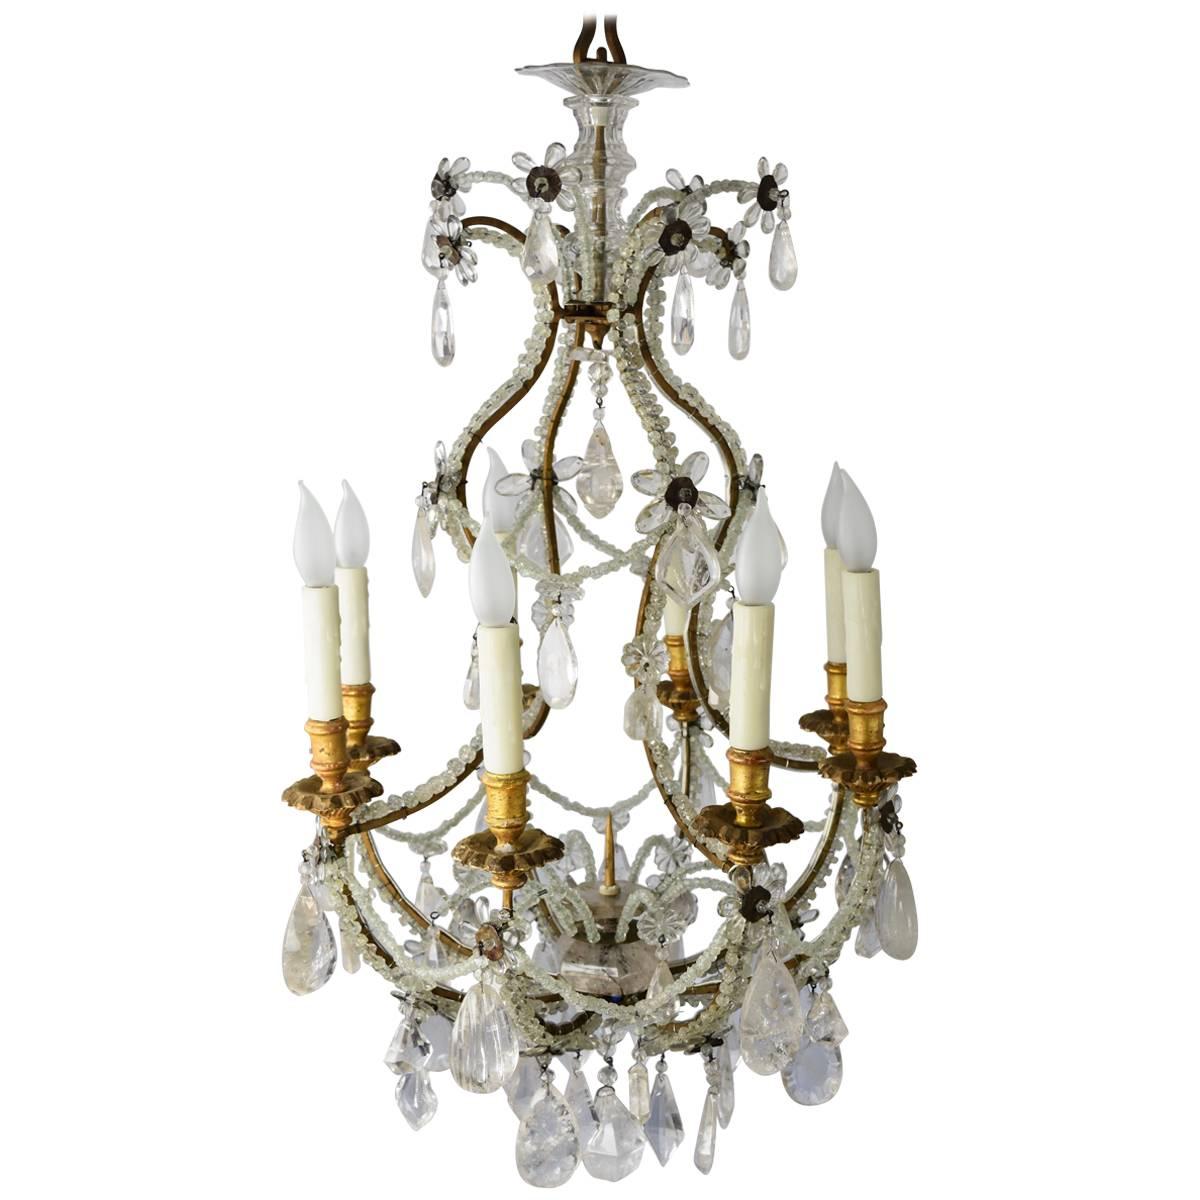 19th Century Beaded Italian Chandelier with Gilt Wooden Bobeches & Rock Crystals